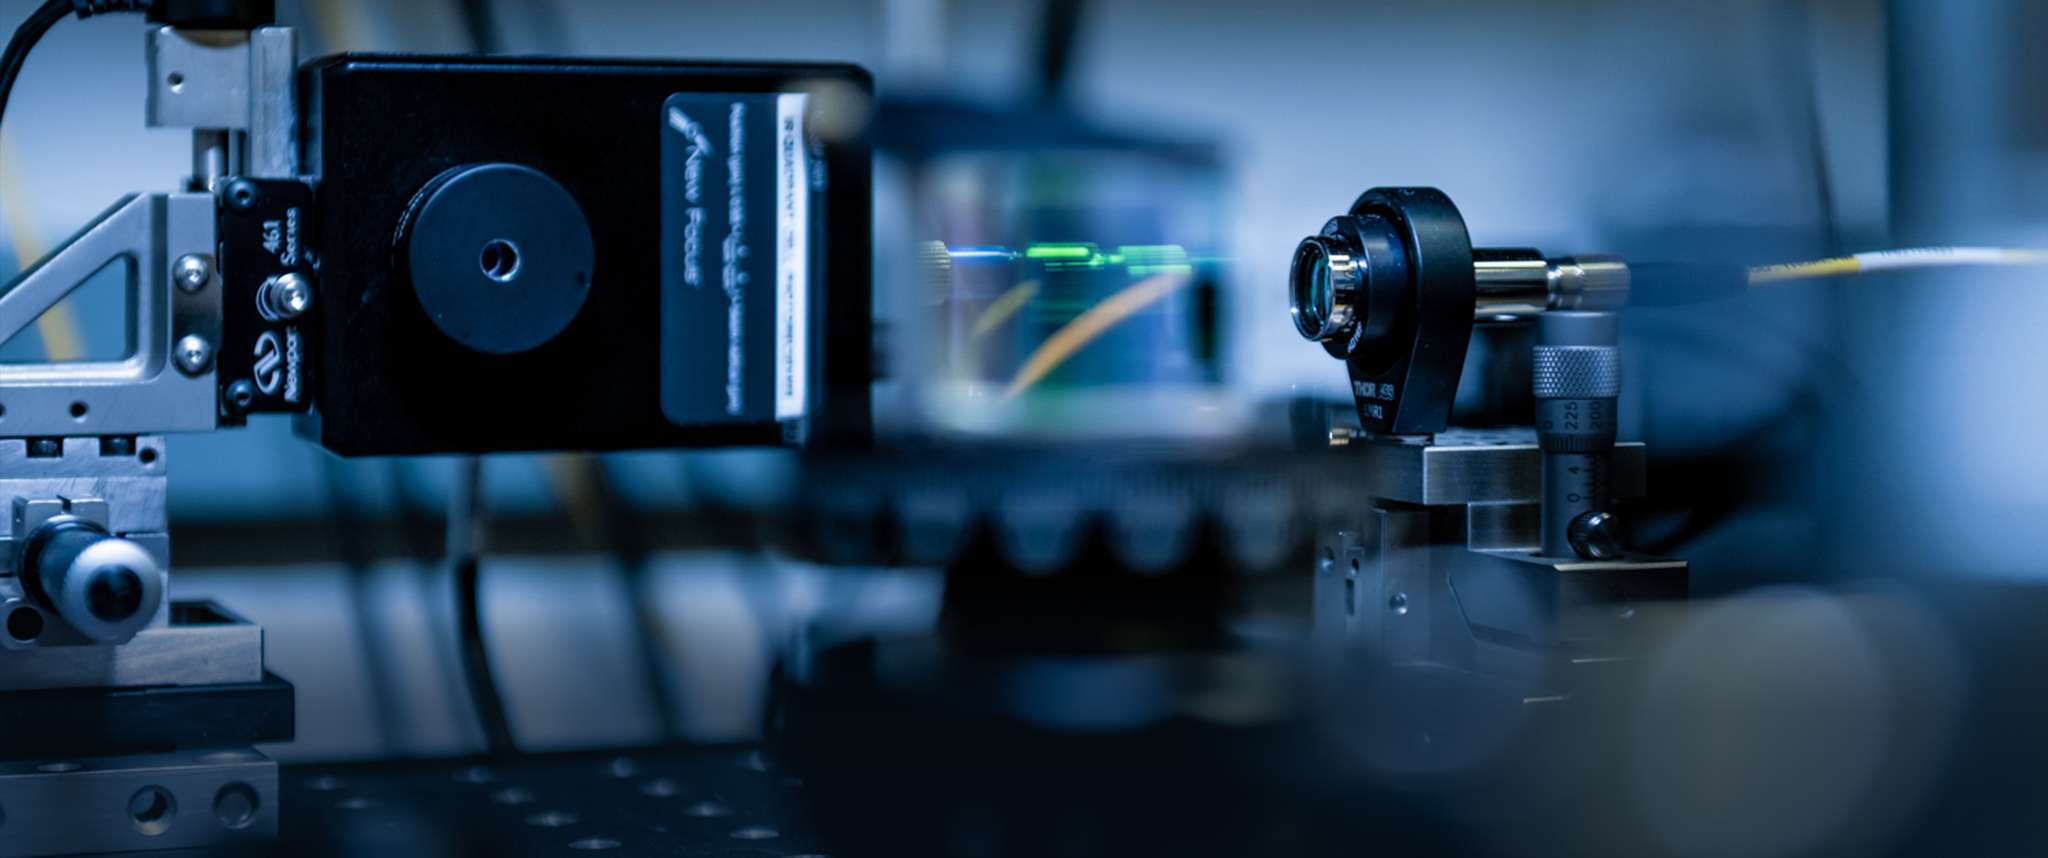 Aerospace's Optical Communication Laboratory works on validating next-generation laser transmitters and detectors. Optical communication is smaller, lighter, uses less power, and provides increased security and much higher data rates.